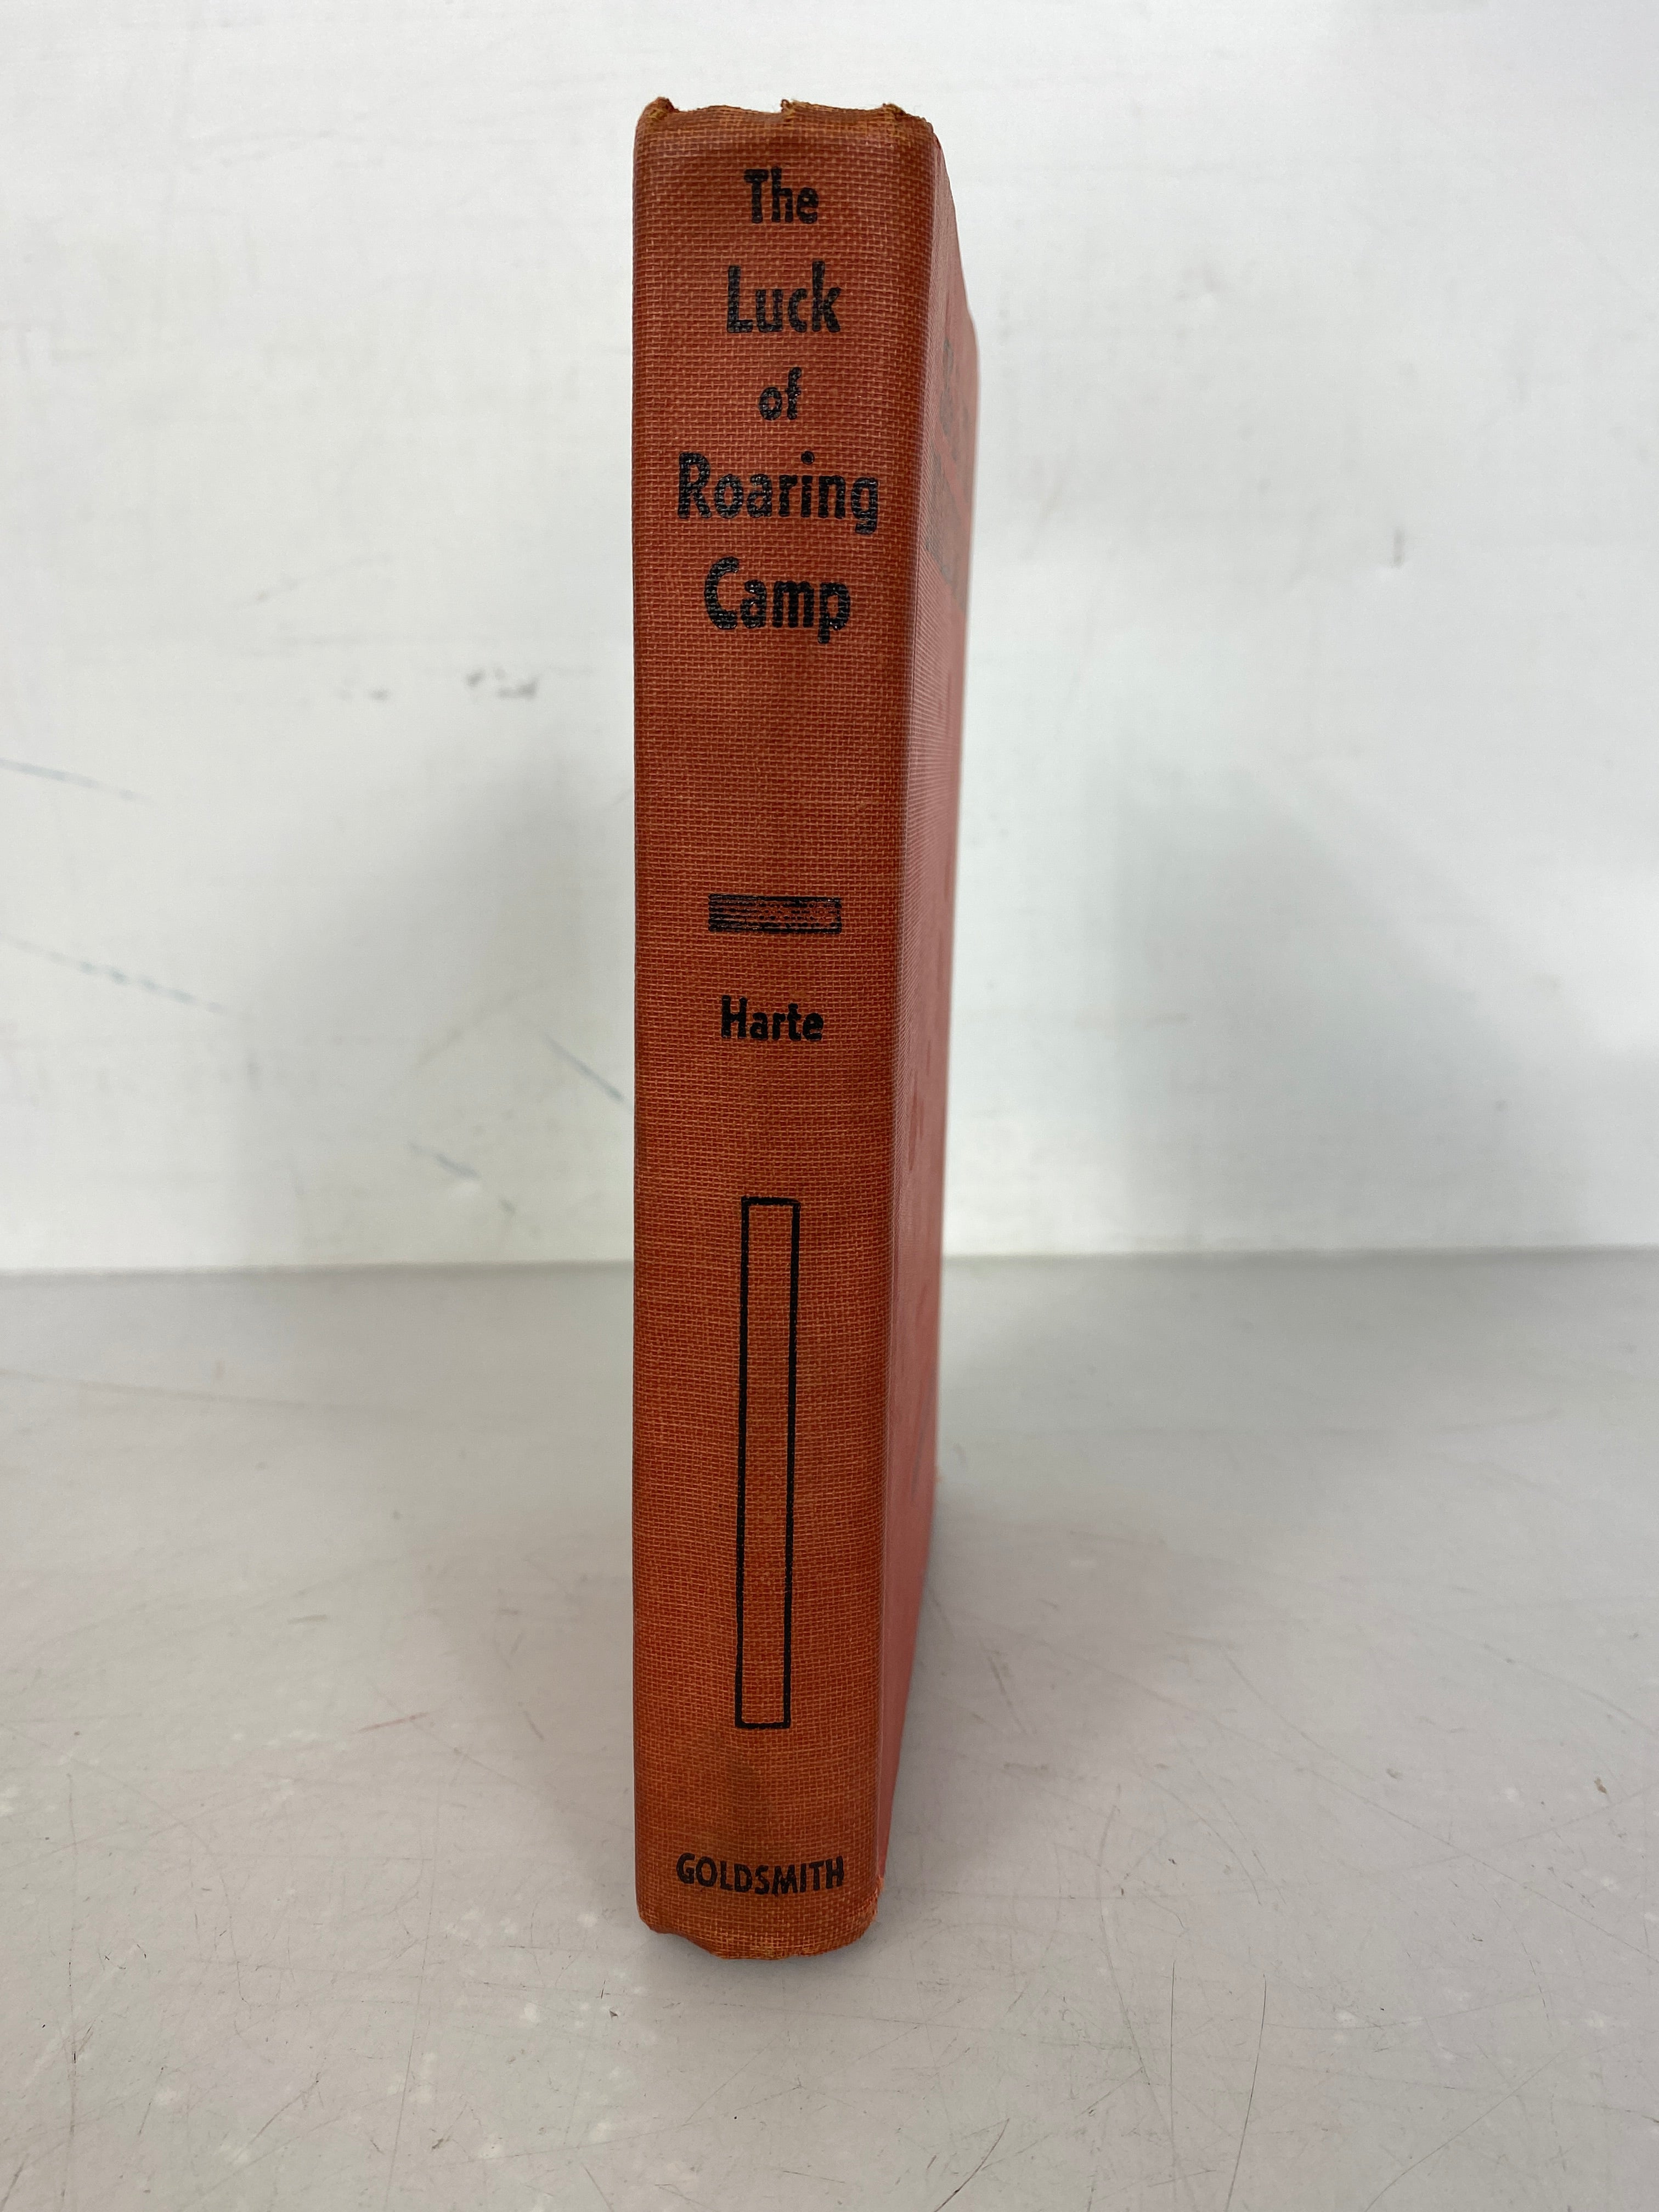 The Luck of the Roaring Camp and Other Stories Bret Harte HC